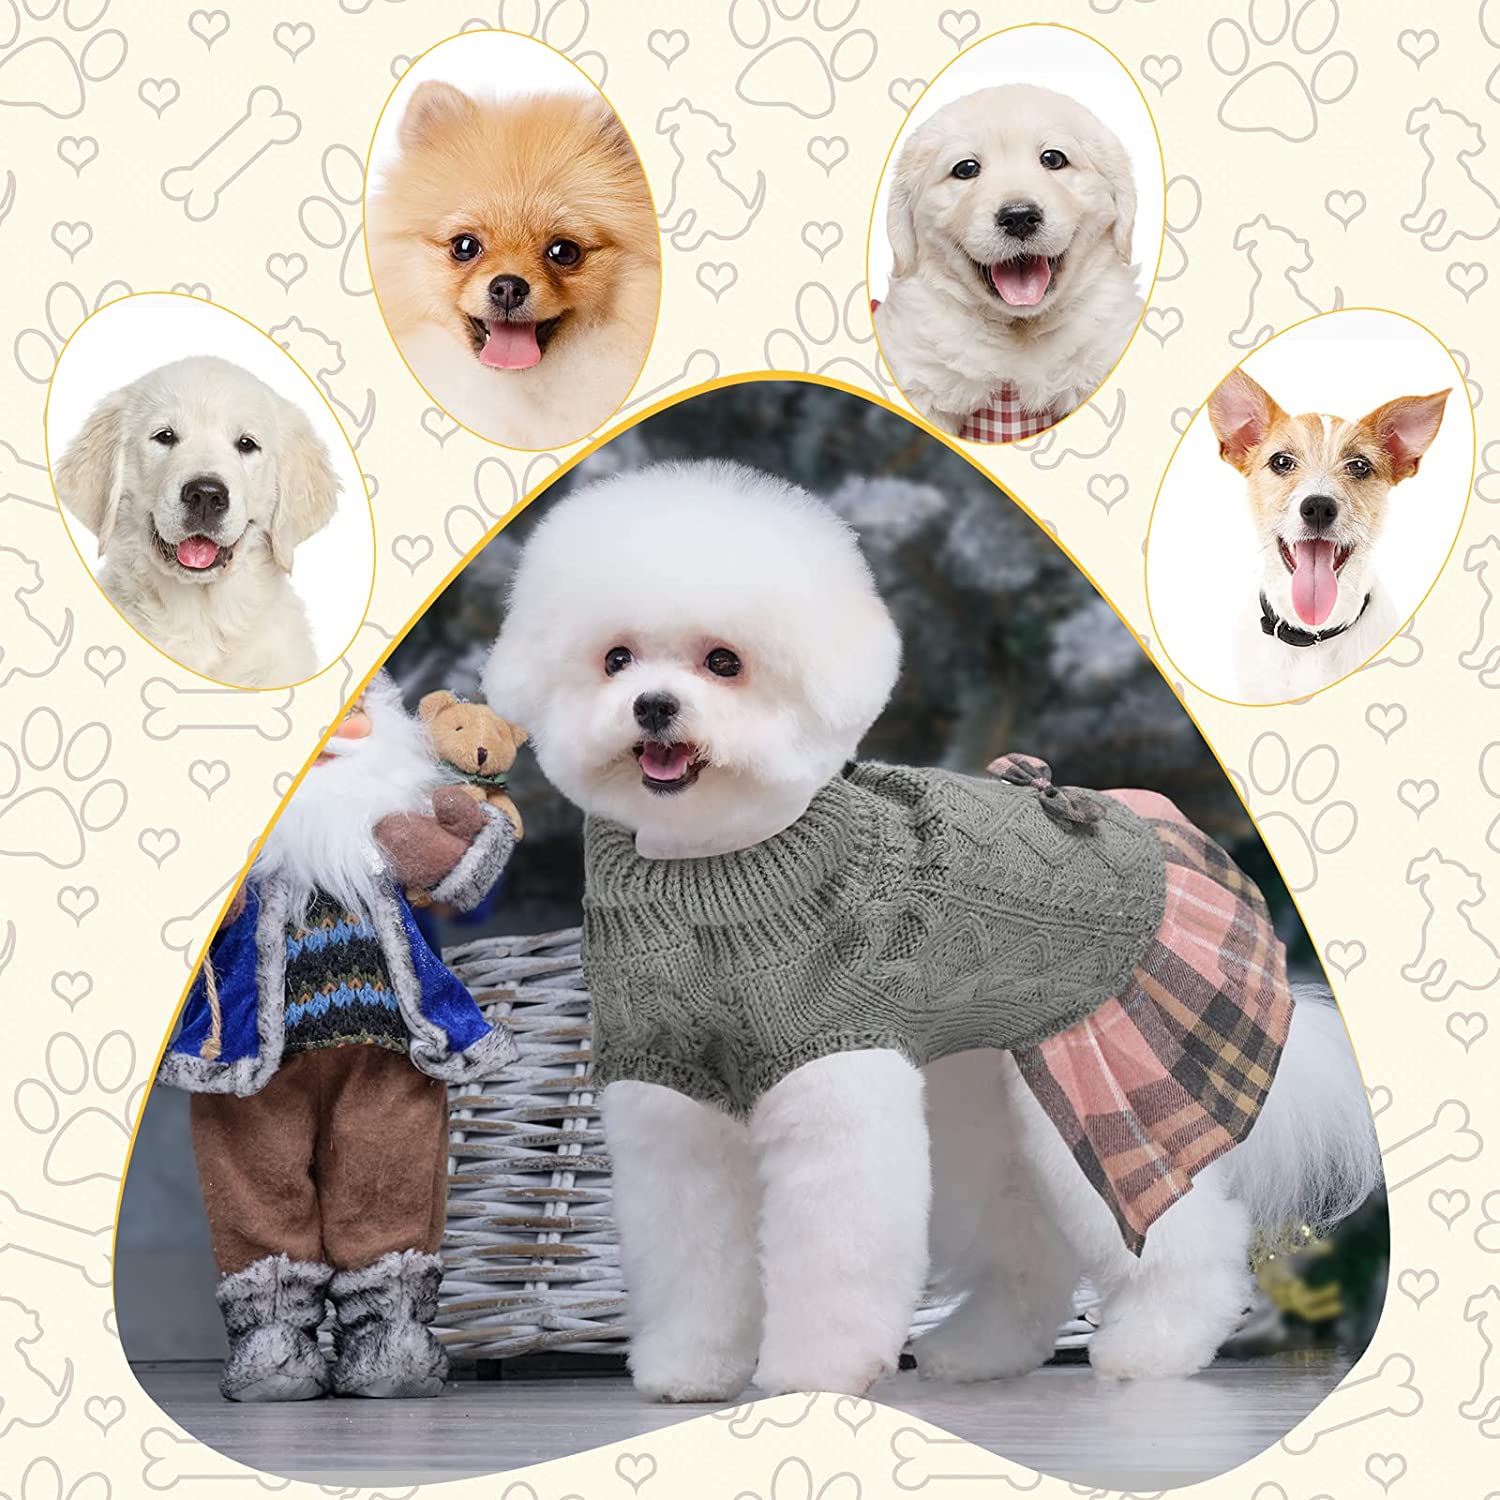 KUTKUT Plaid Sweater Tutu Dress with Bowtie for Small Dogs - Dog Turtleneck Pullover Knitwear Cold Weather Sweater with Leash Hole, Suitable for Small Dogs, Cats Puppies-Clothing-kutkutstyle